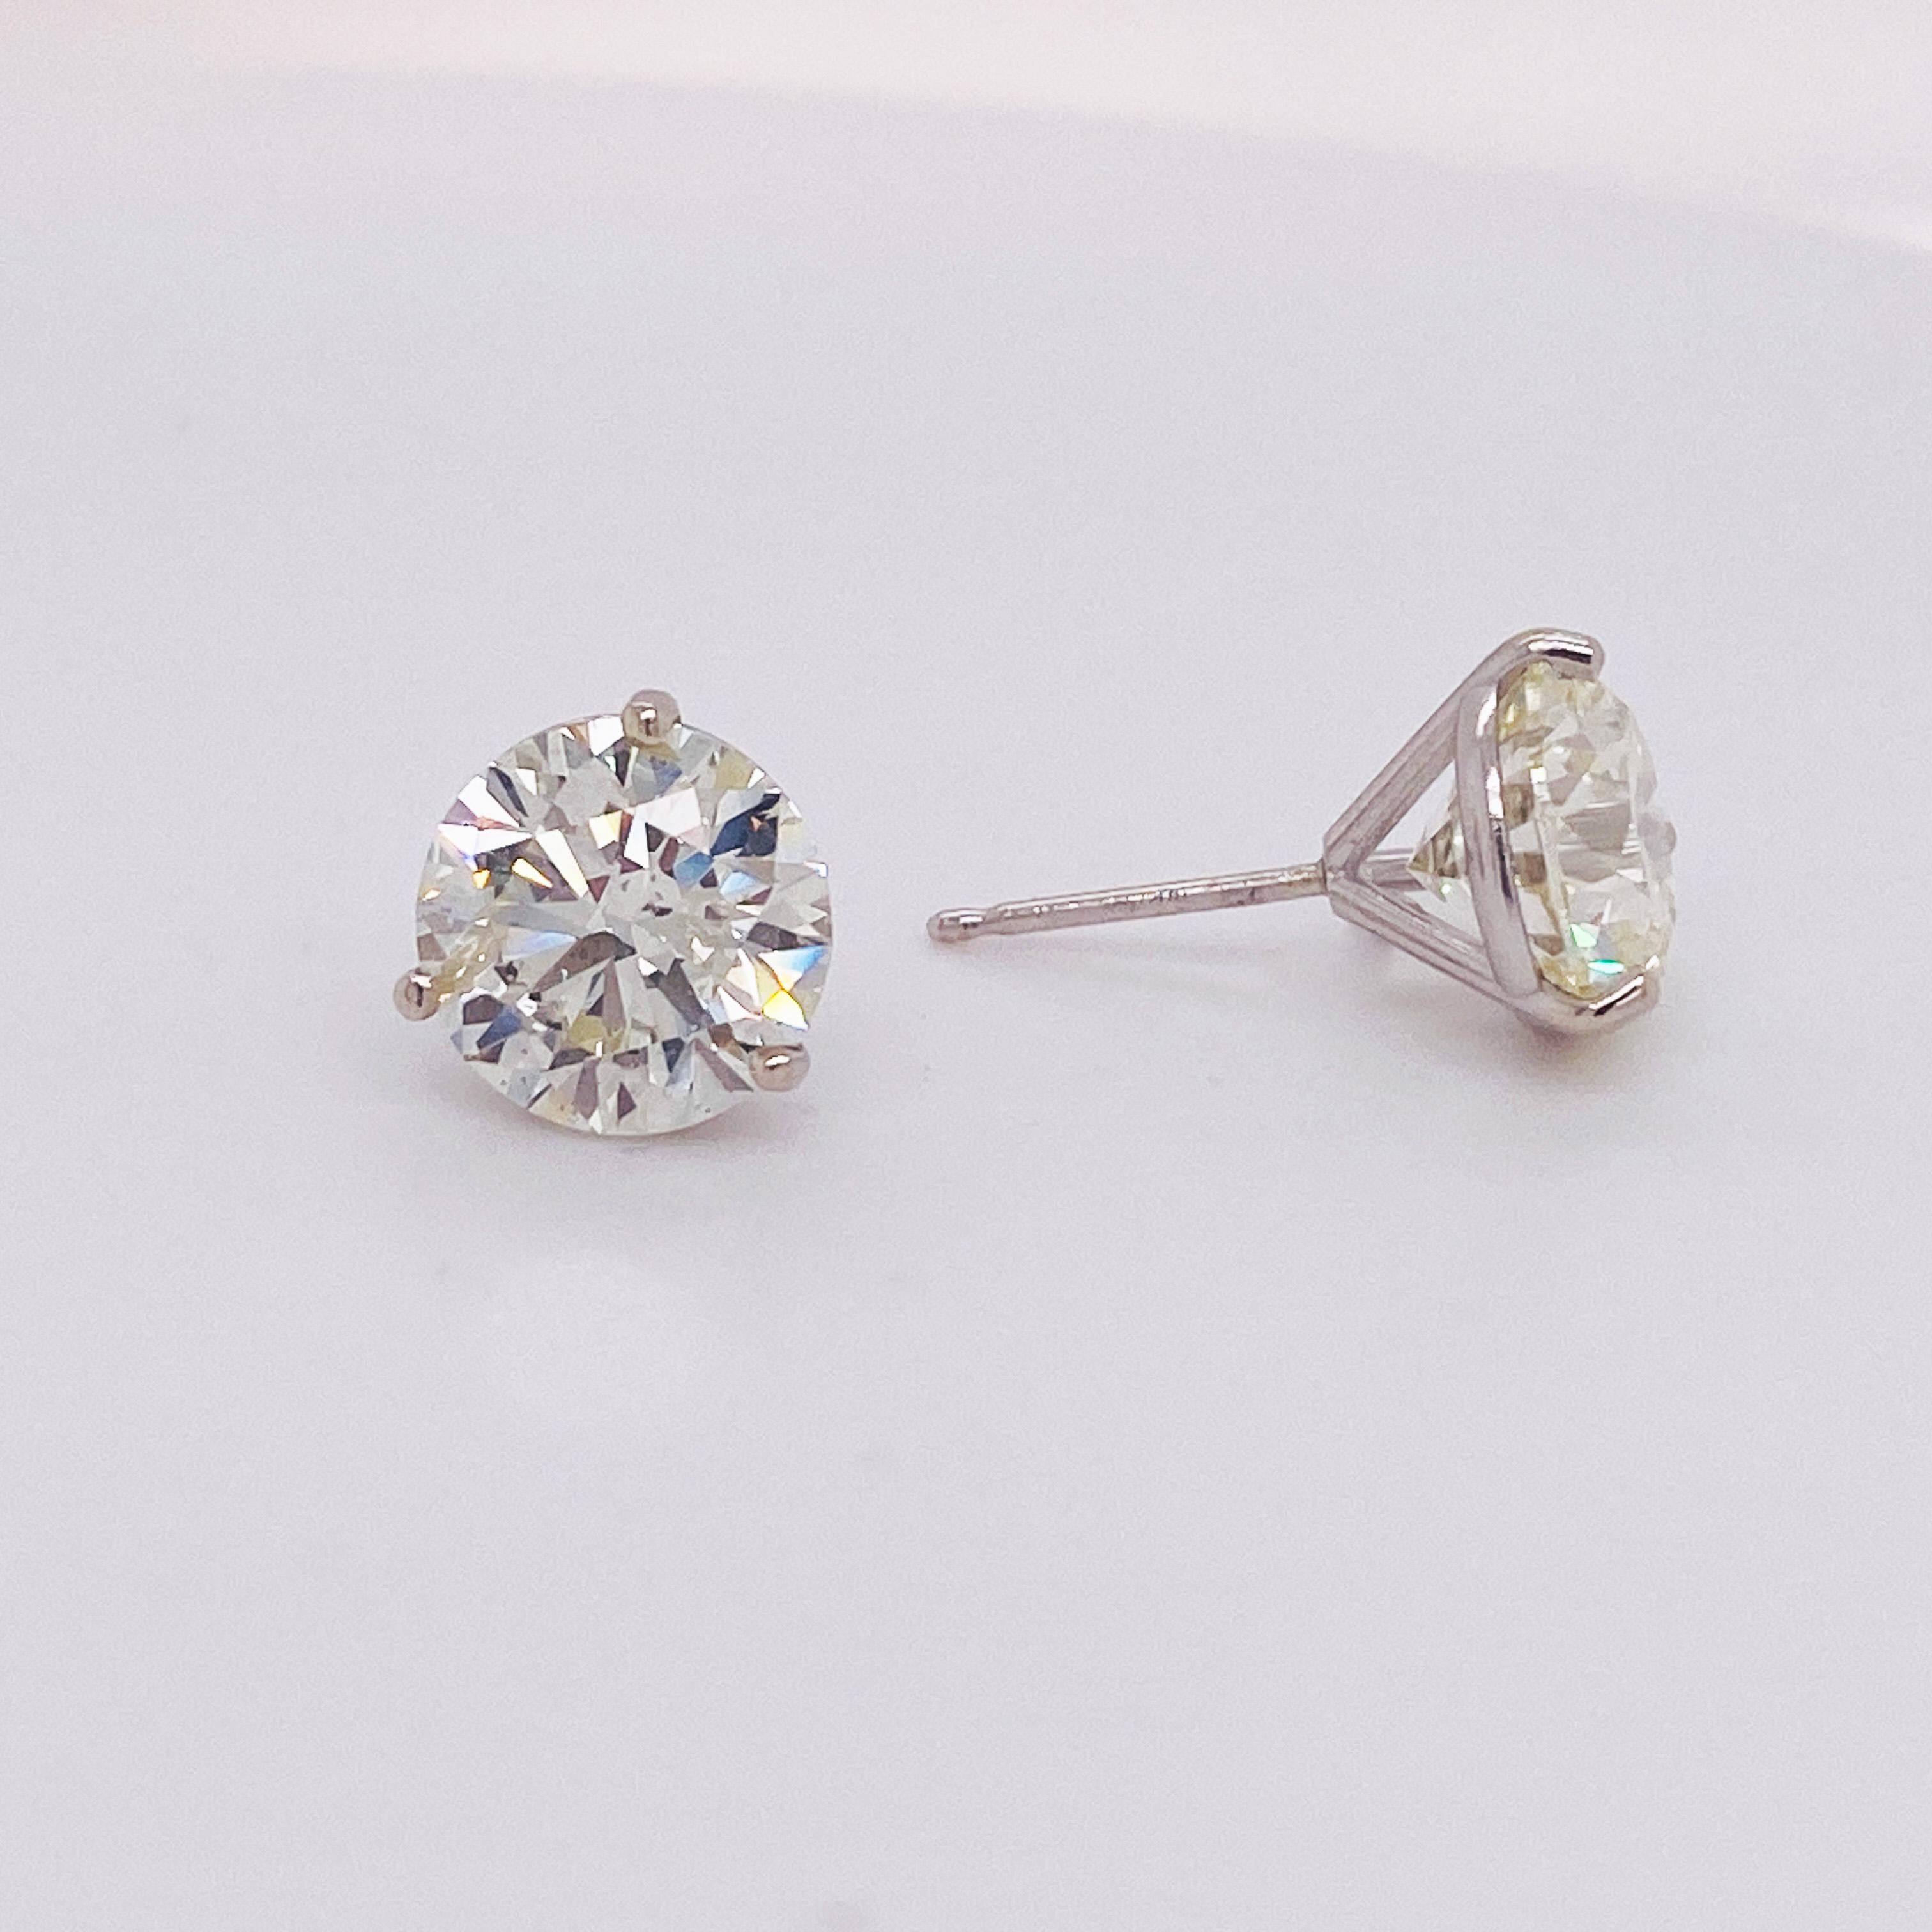 Round Cut 5.00 Carat Diamond Pair Martini Stud Earrings in 14K Gold Lv For Sale